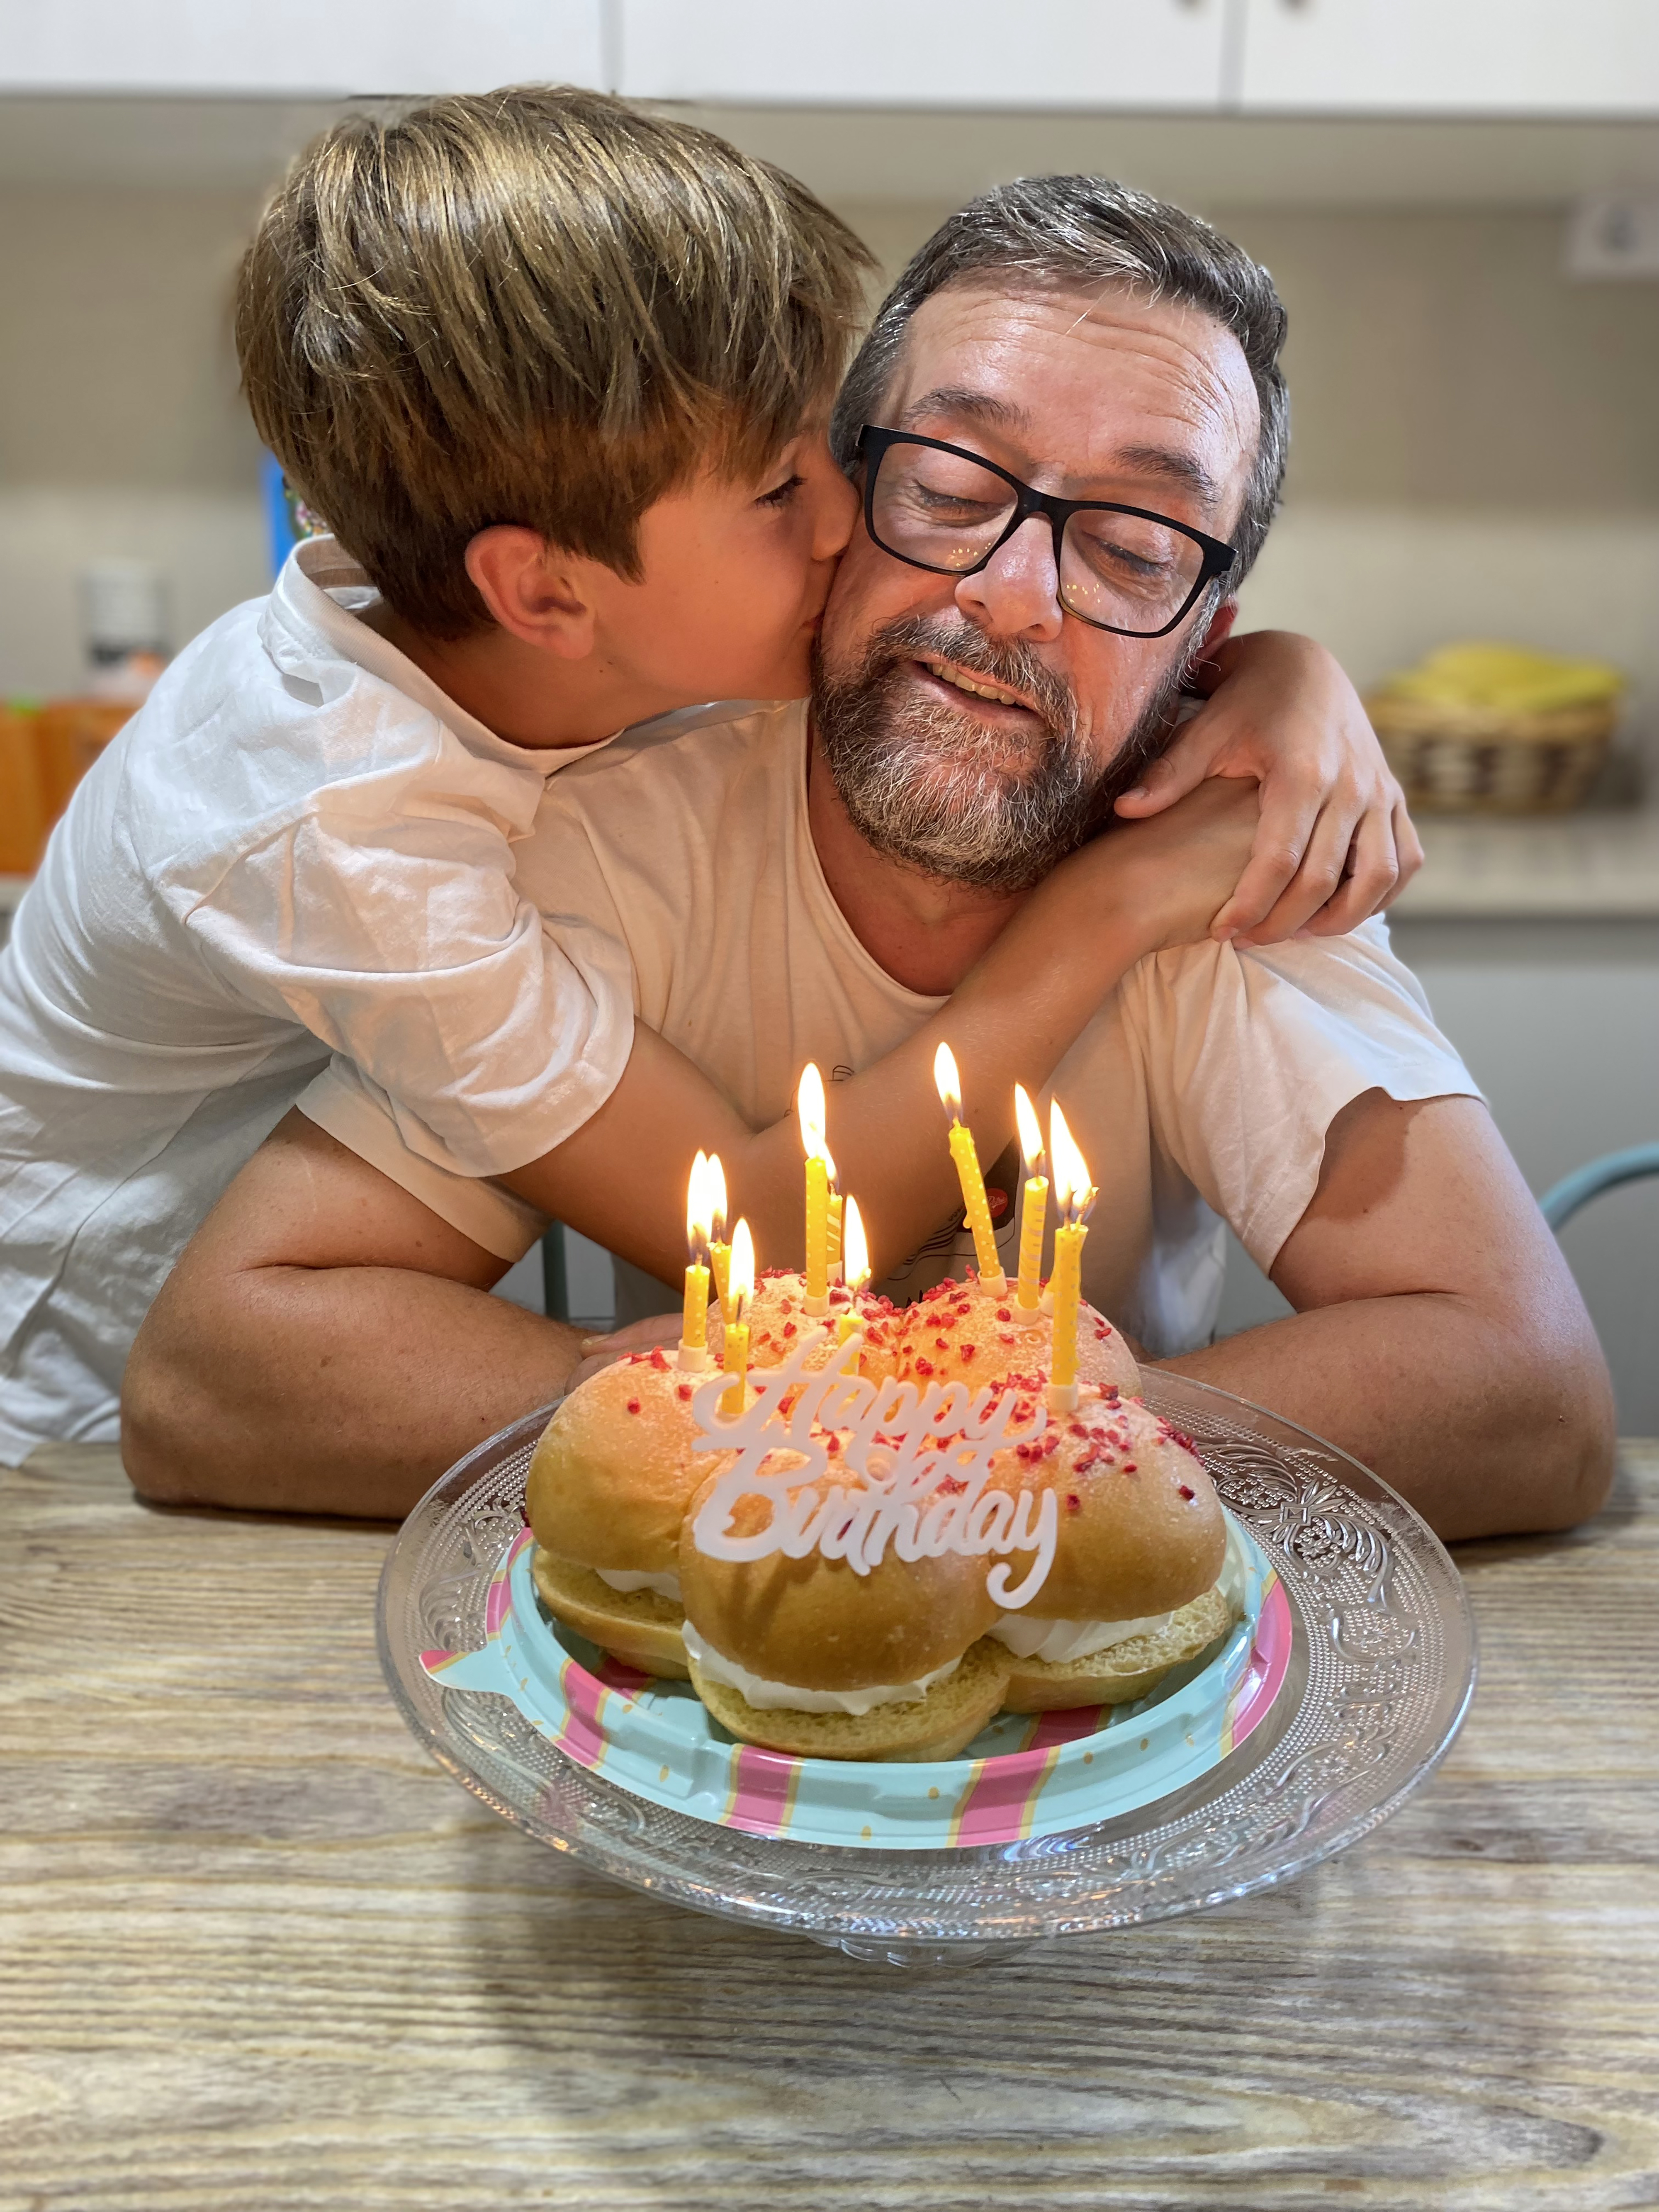 man blowing out birthday cake with child